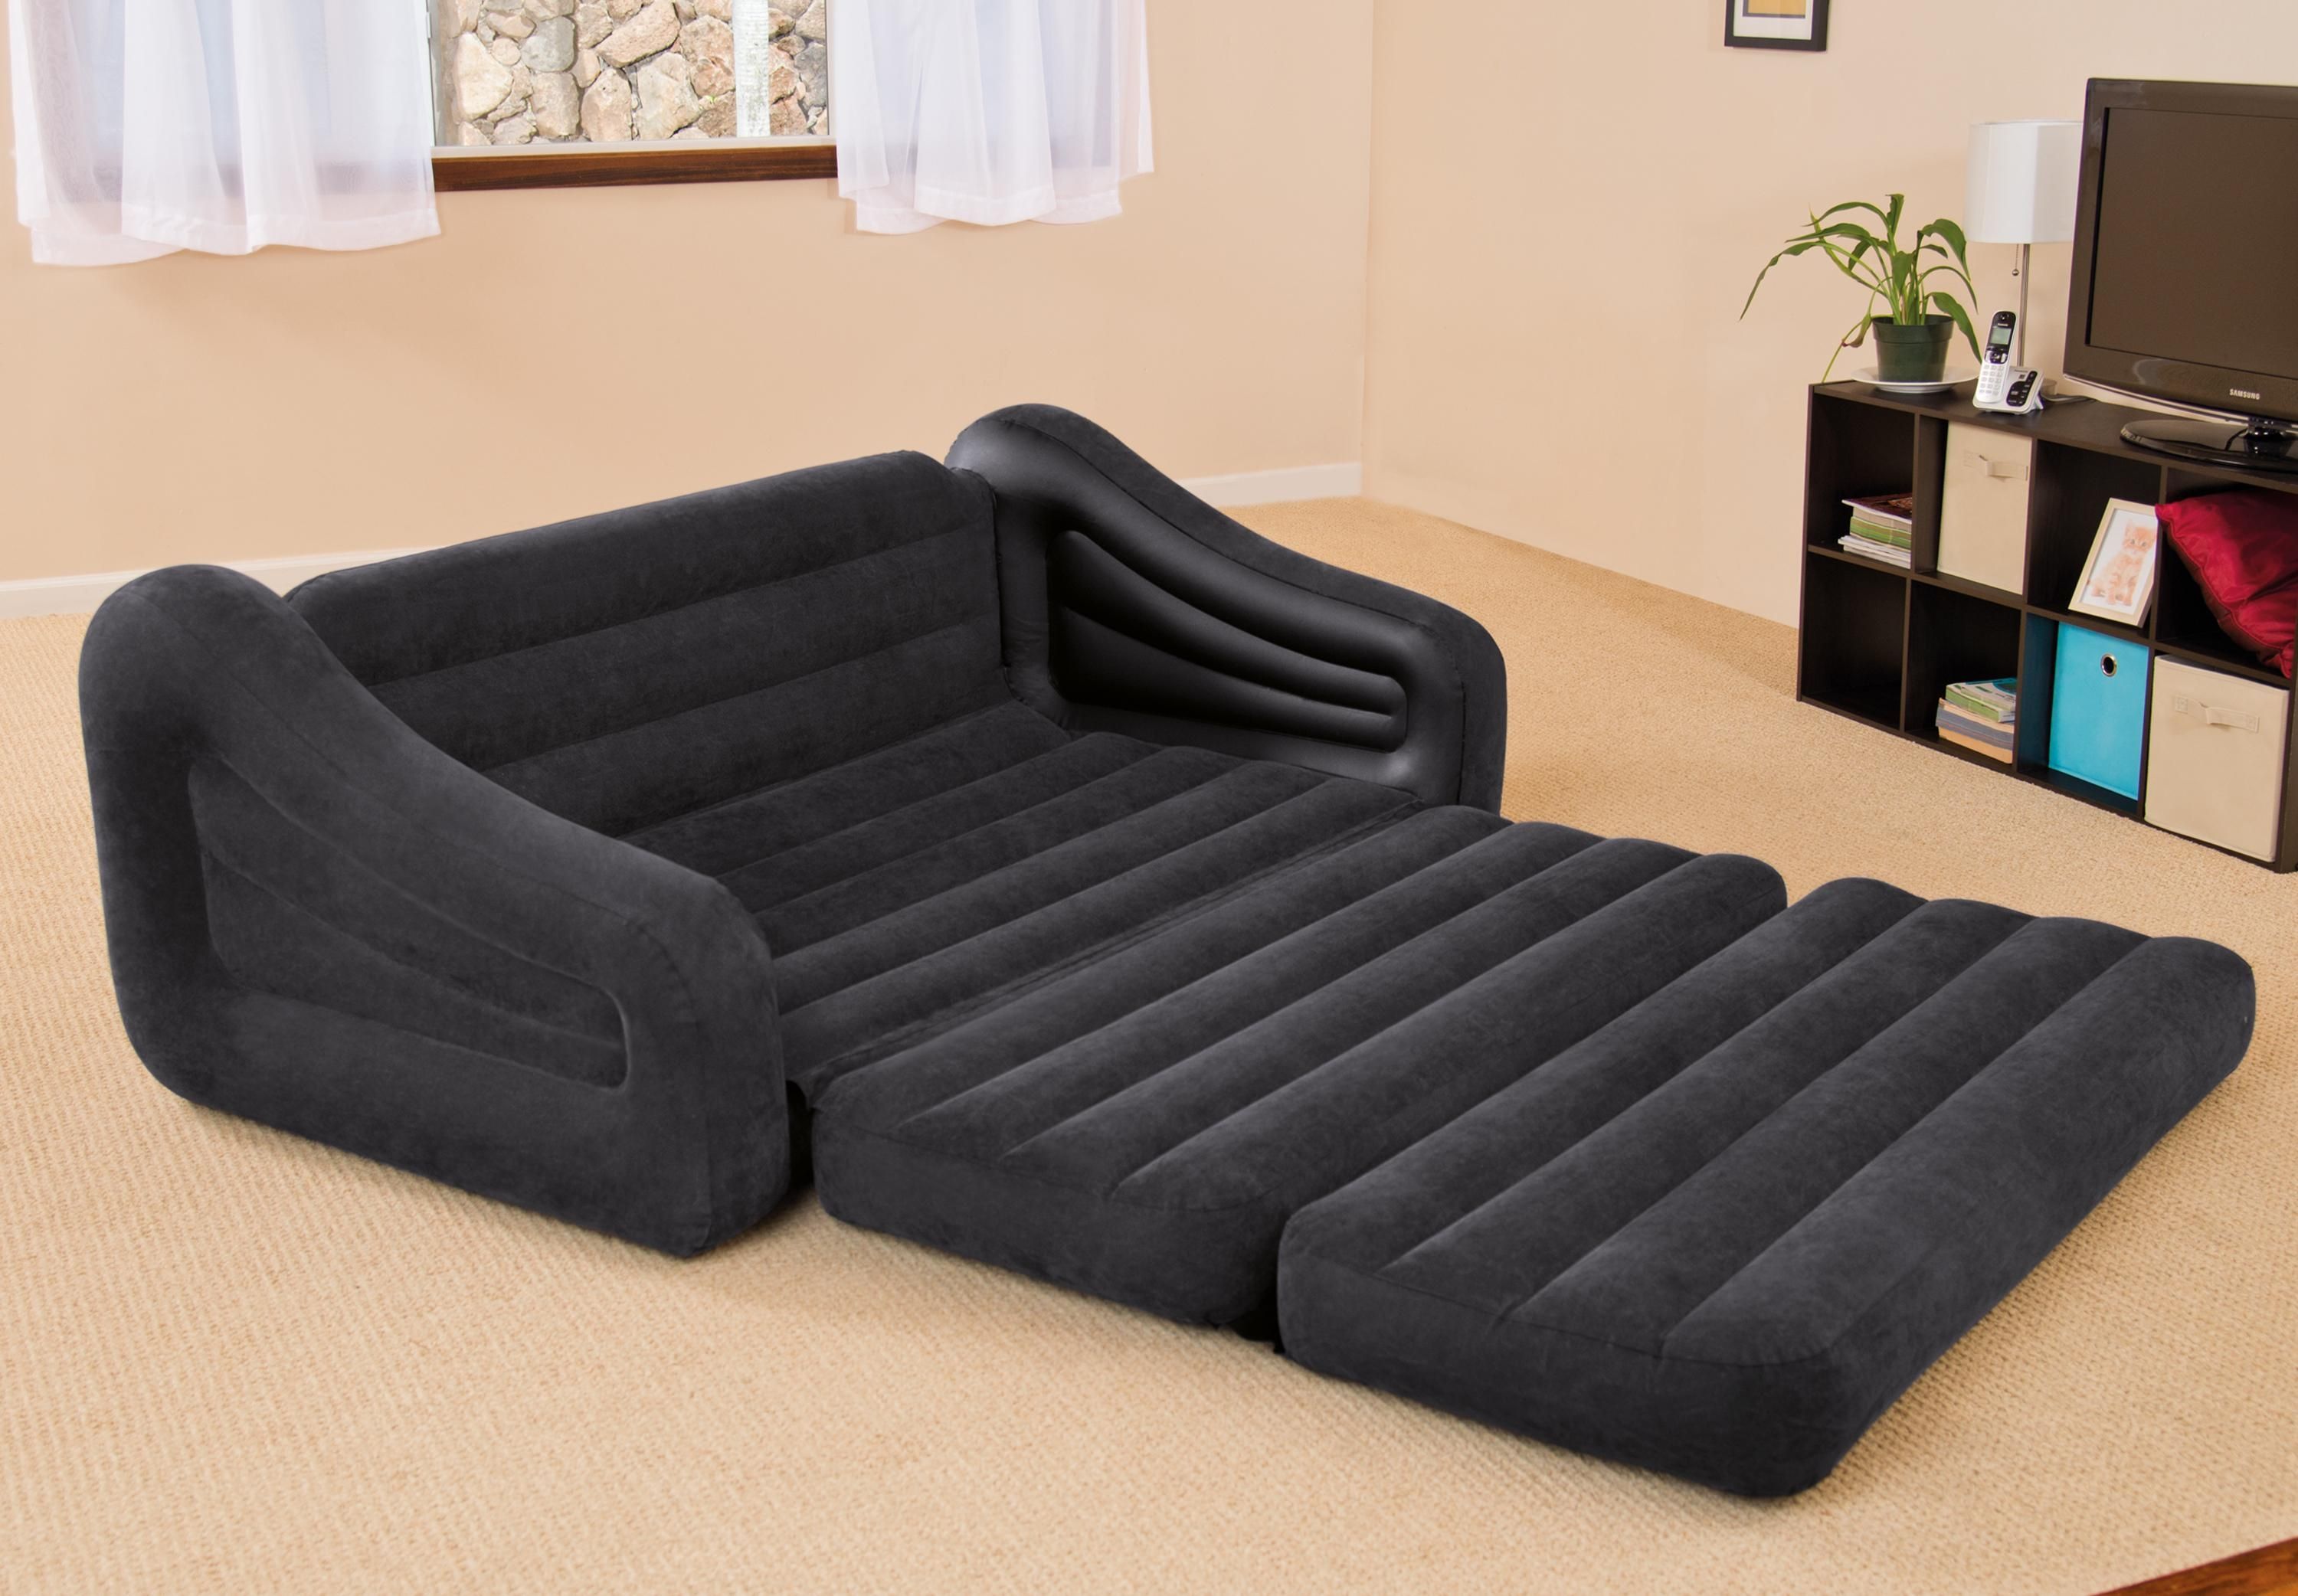 Intex Inflatable Pull Out Sofa & Queen Bed Mattress Sleeper W/ Ac For Inflatable Pull Out Sofas (View 12 of 20)